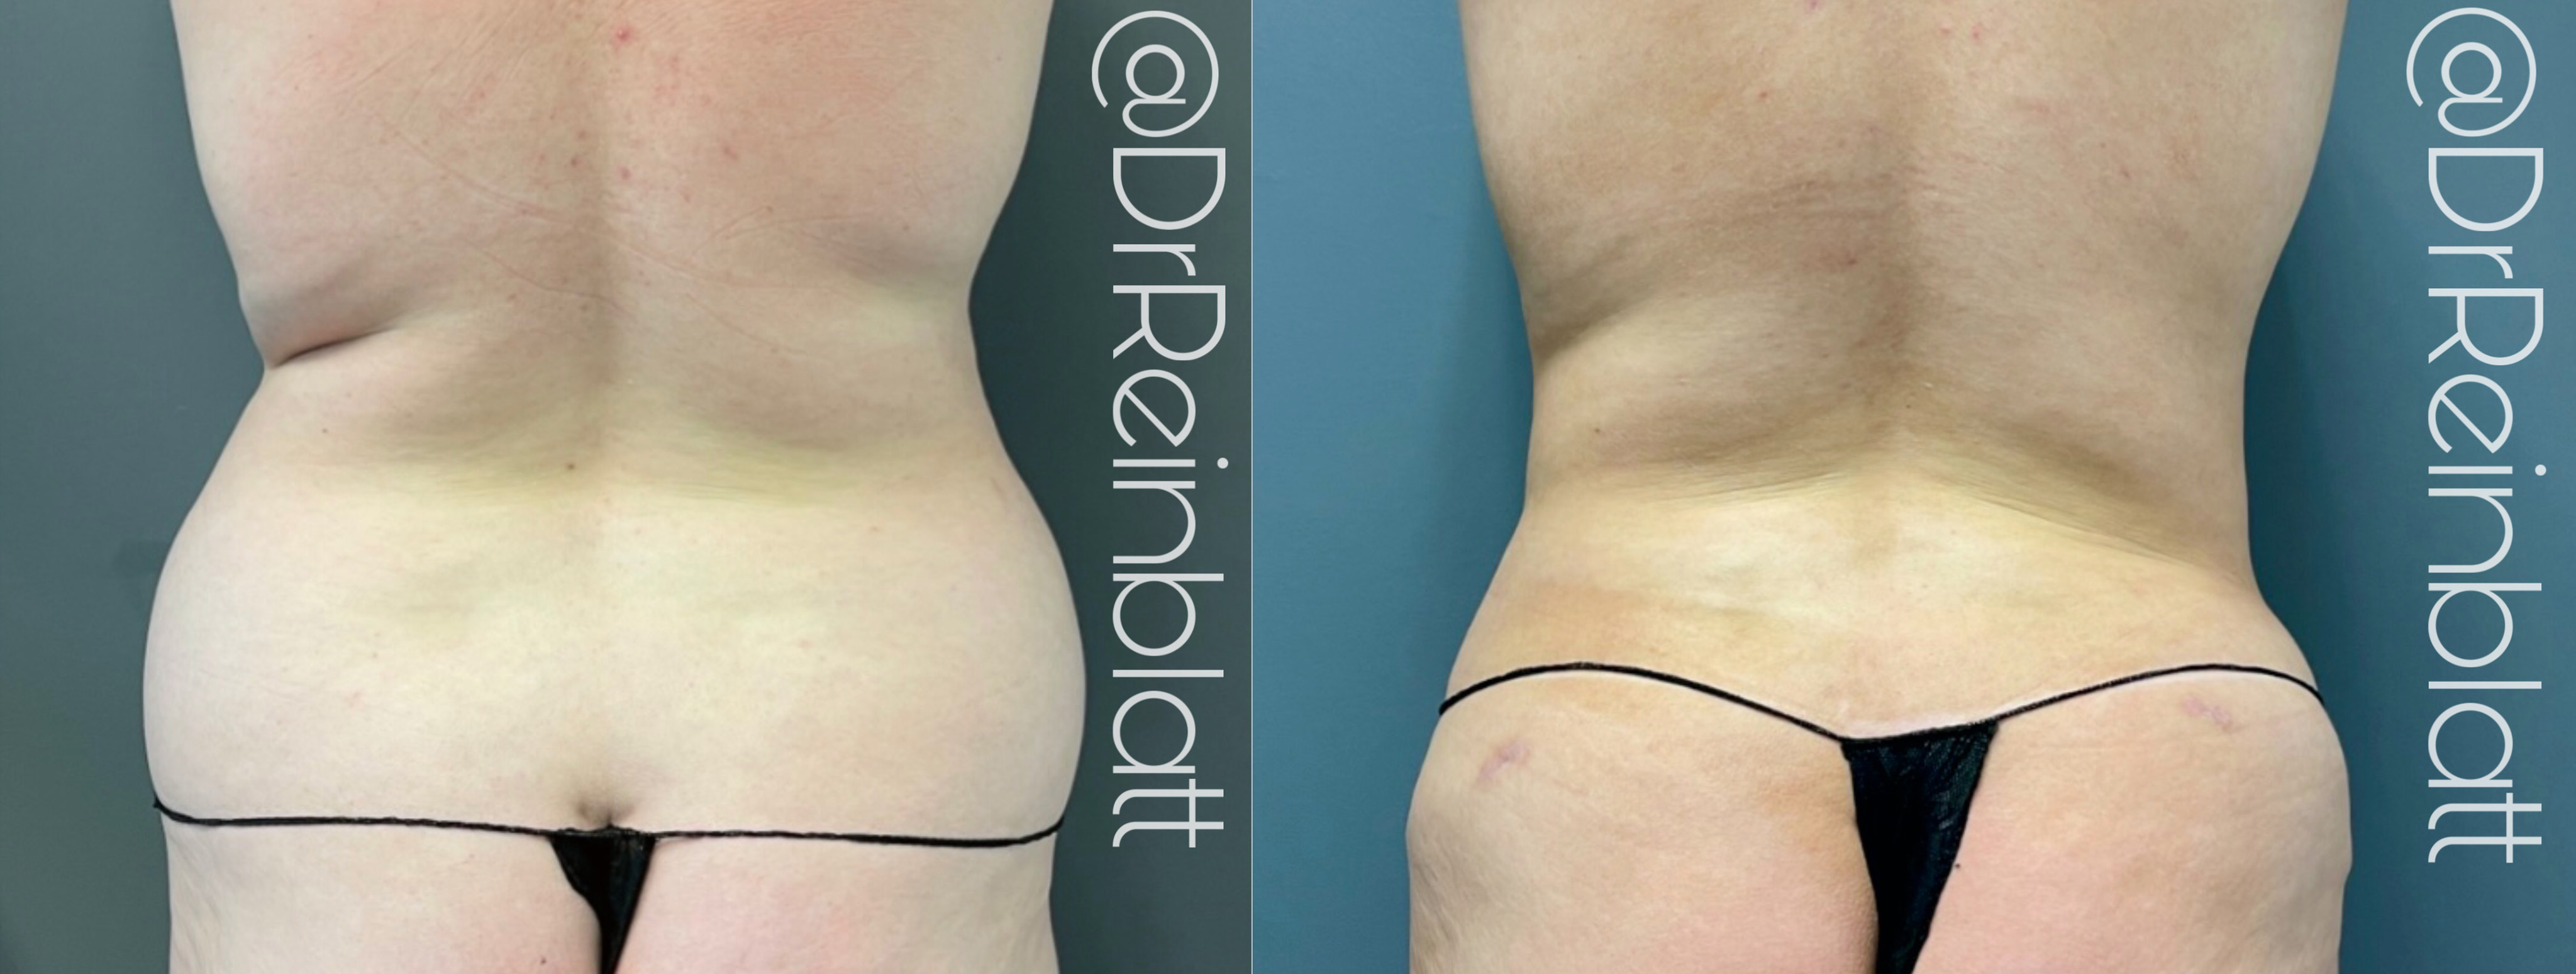 Liposuction Before and After | Dr. Maura Reinblatt